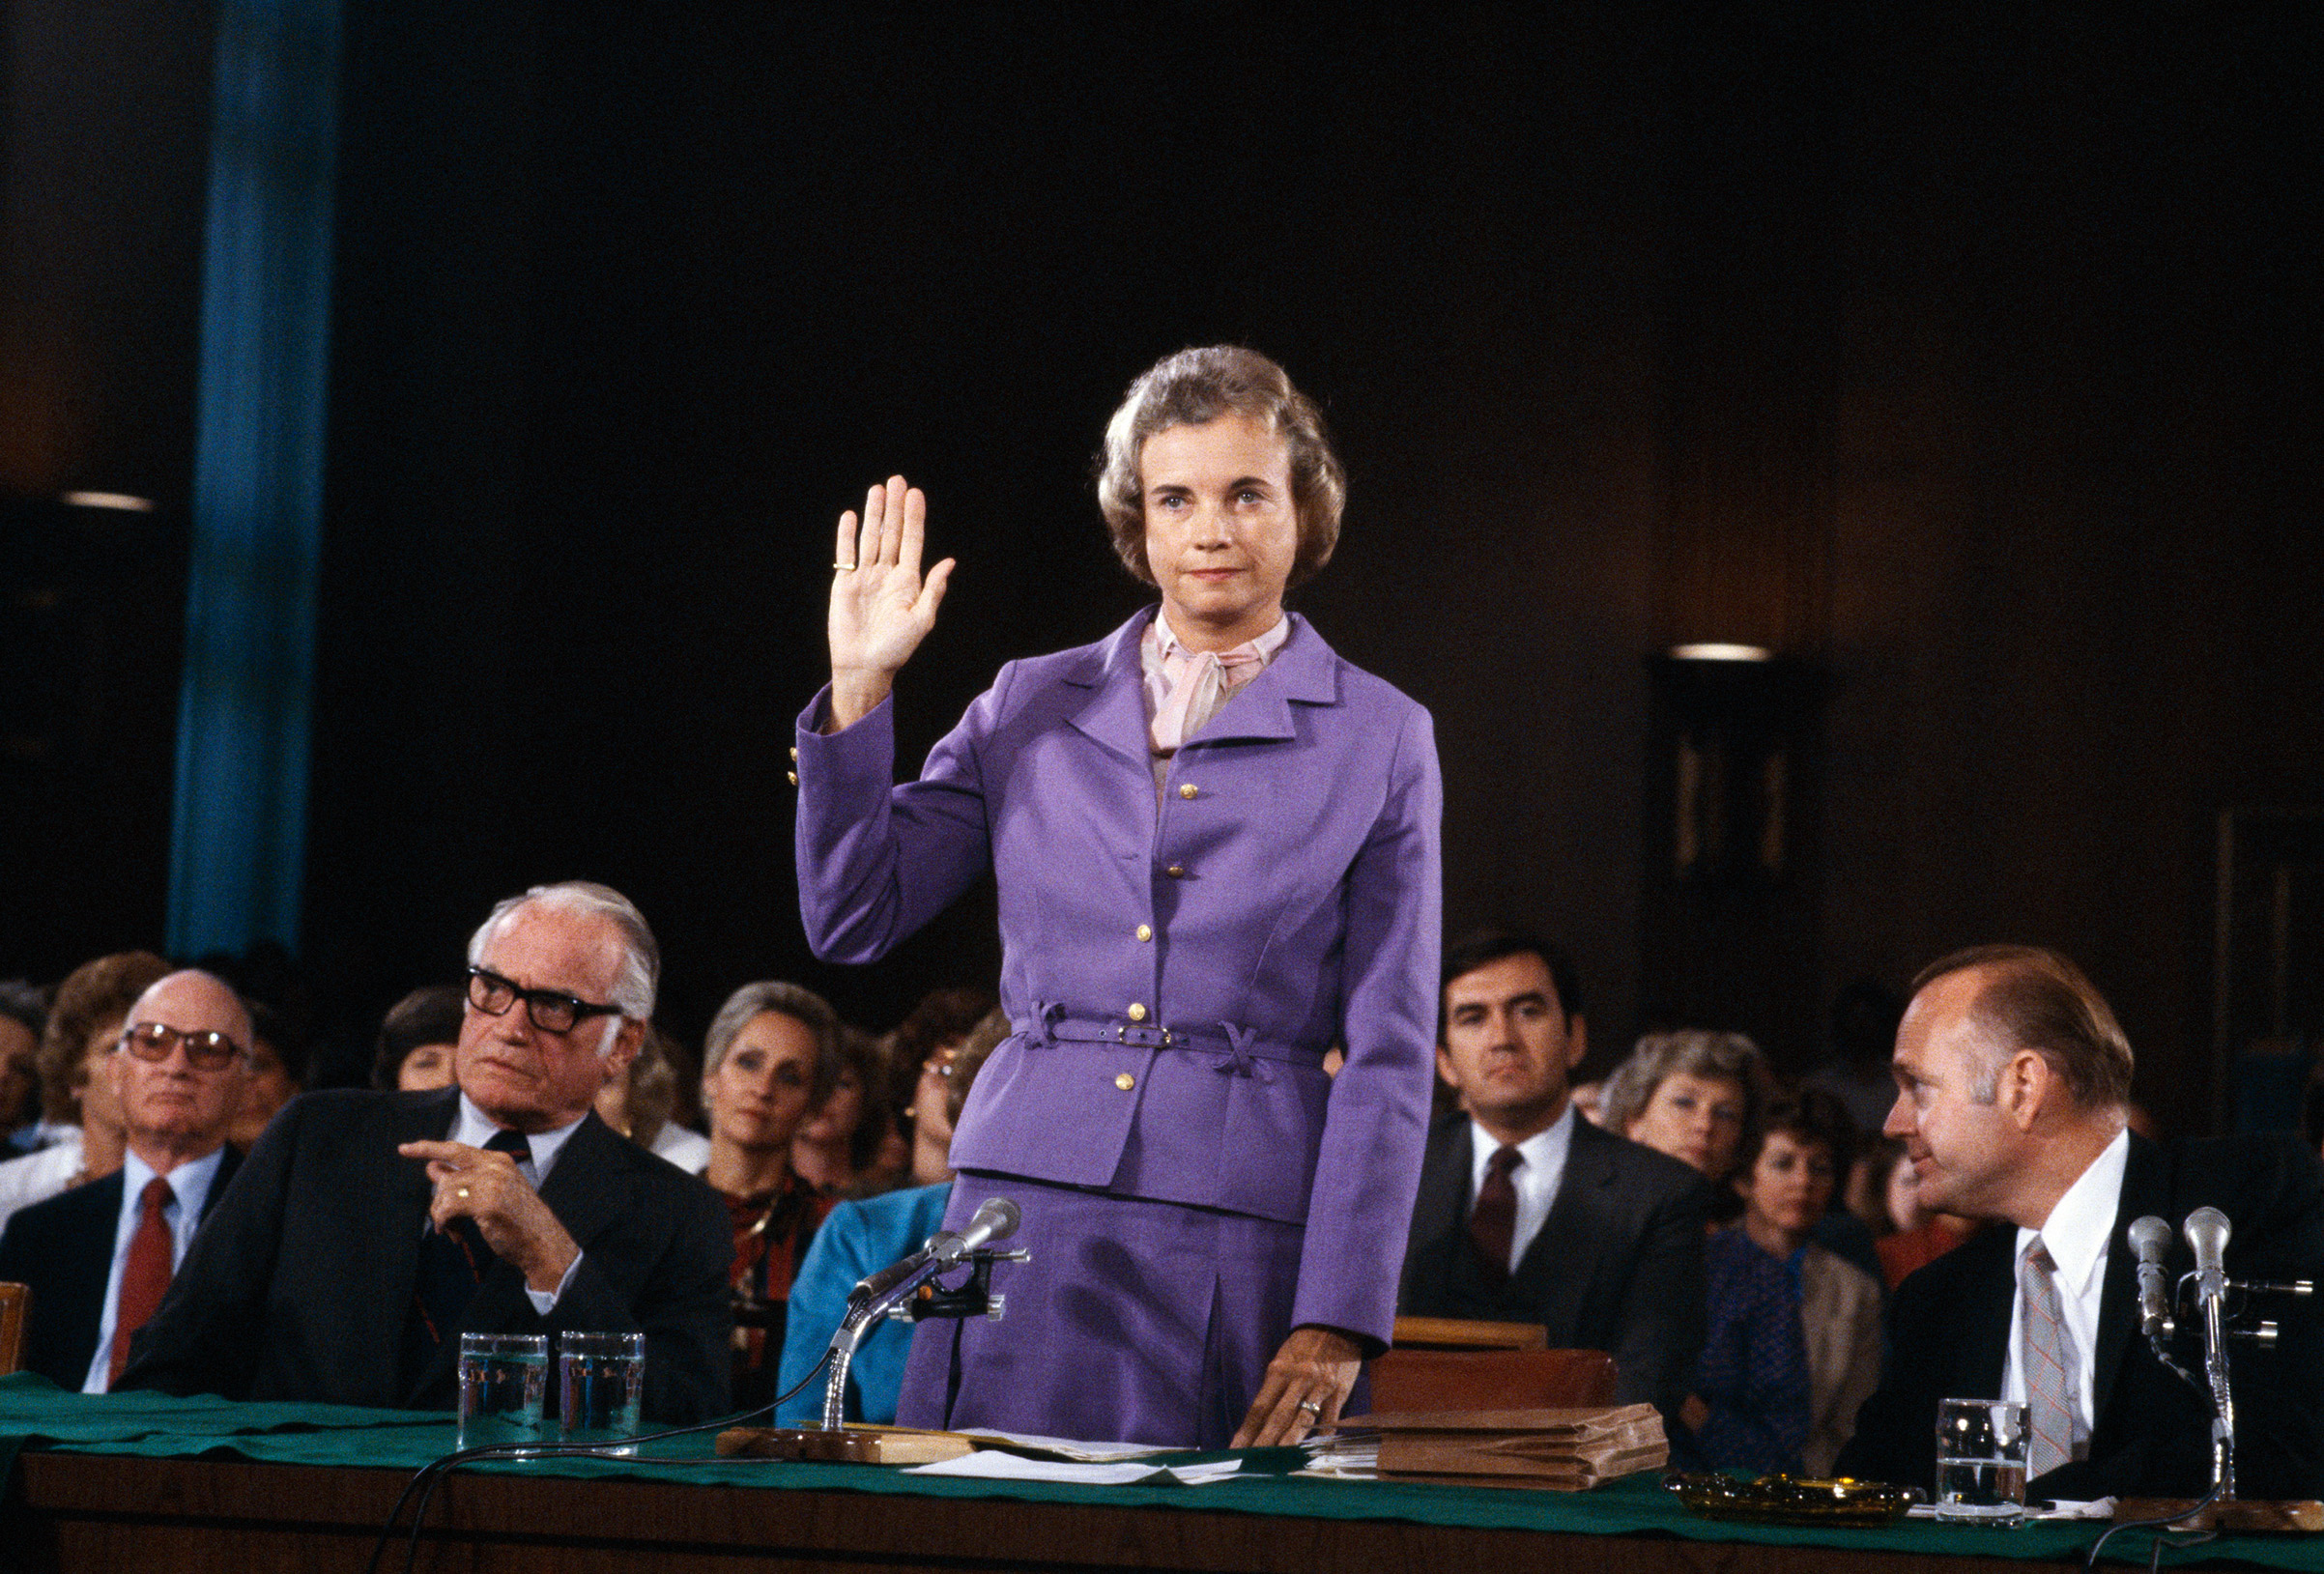 Sandra Day O'Connor is sworn in before the Senate Judiciary committee during confirmation hearings in 1981 in Washington, D.C. as she seeks to become the first female Supreme Court Justice. (David Hume Kennerly—Getty Images)